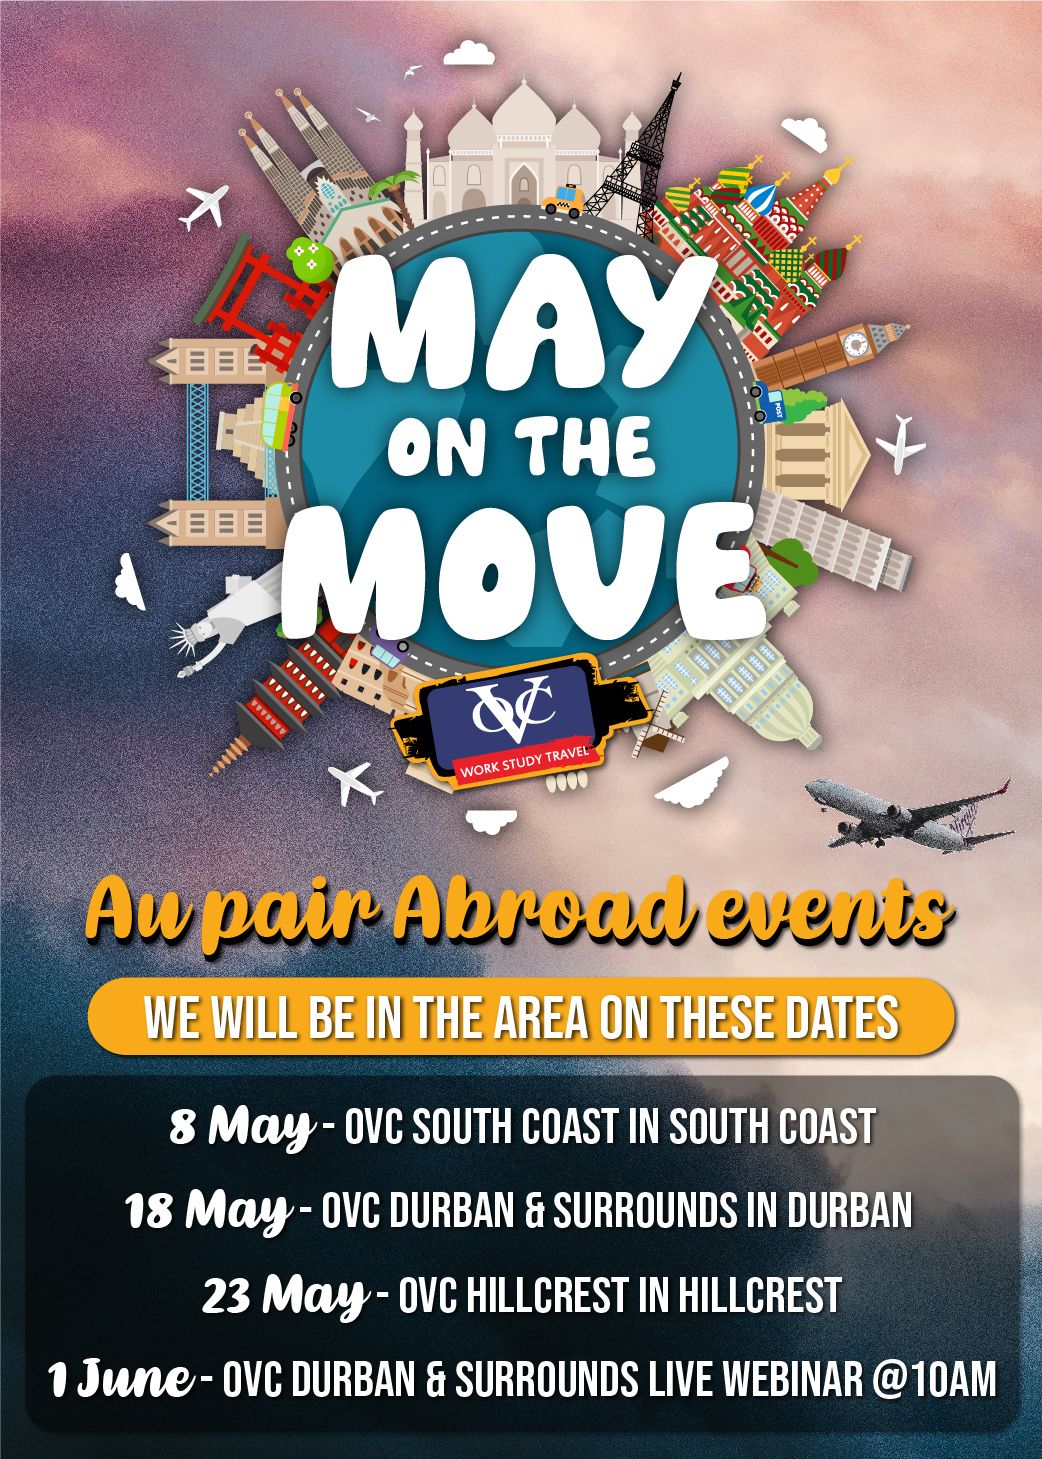 May on the Move - Join OVC Durban to find out more about Aupairing in the US and Europe